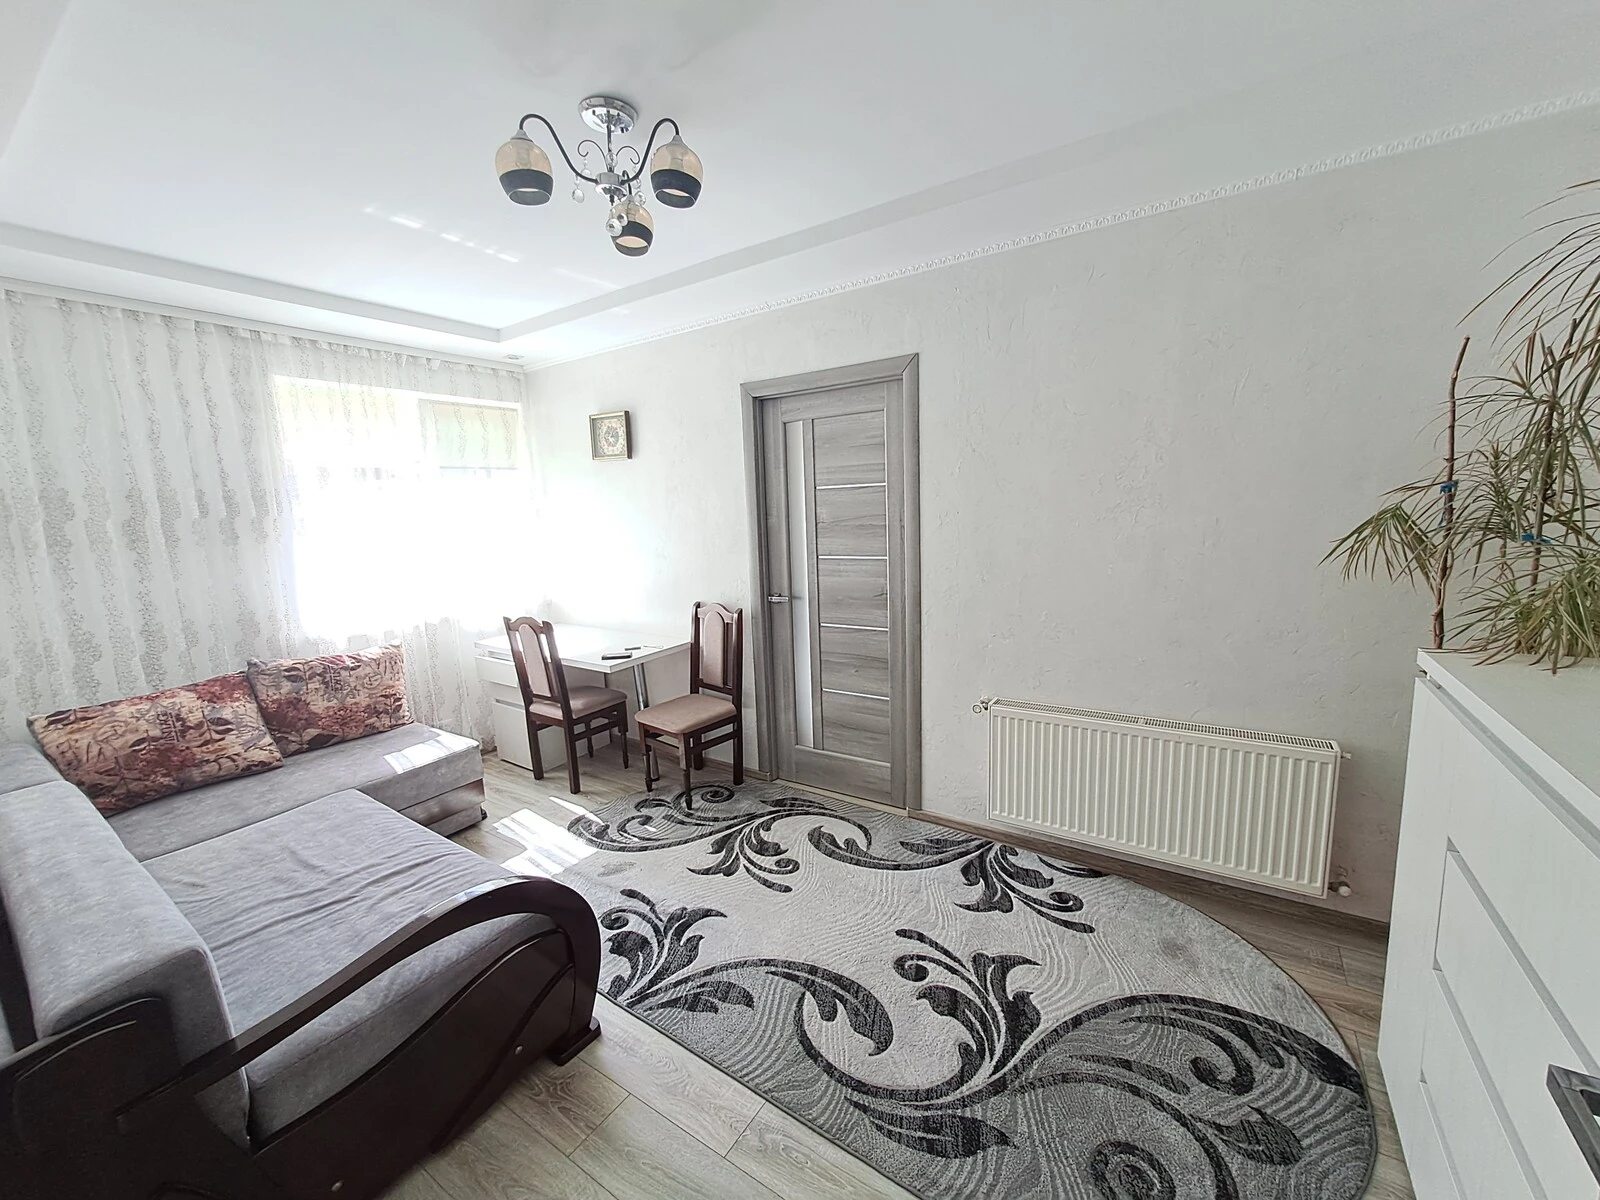 Apartments for sale. 2 rooms, 44 m², 1st floor/3 floors. Obyizna vul., Ternopil. 